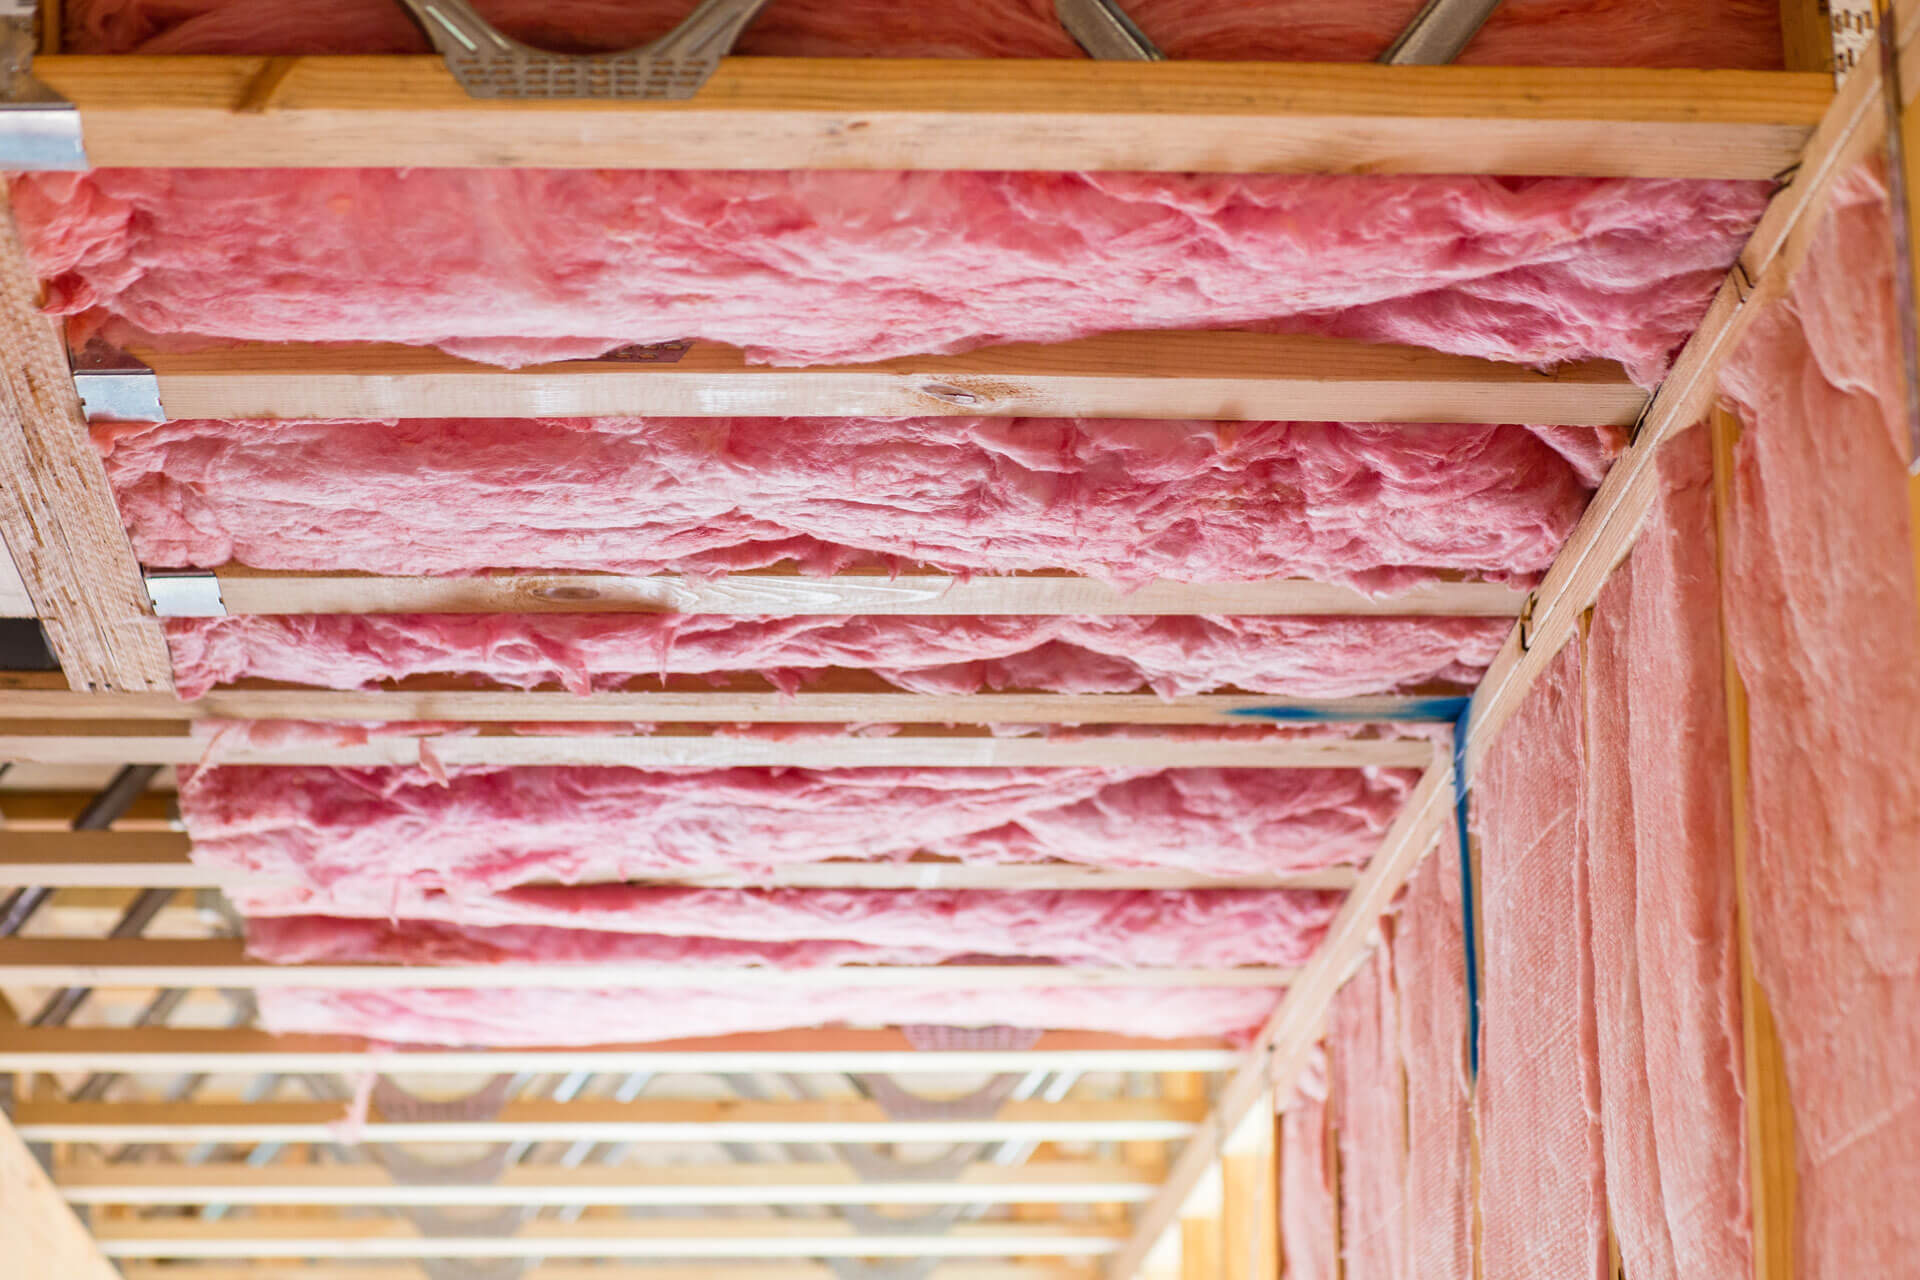 Buy R3.0 Insulation Online - Cheap R3.0 Ceiling Insulation Batts